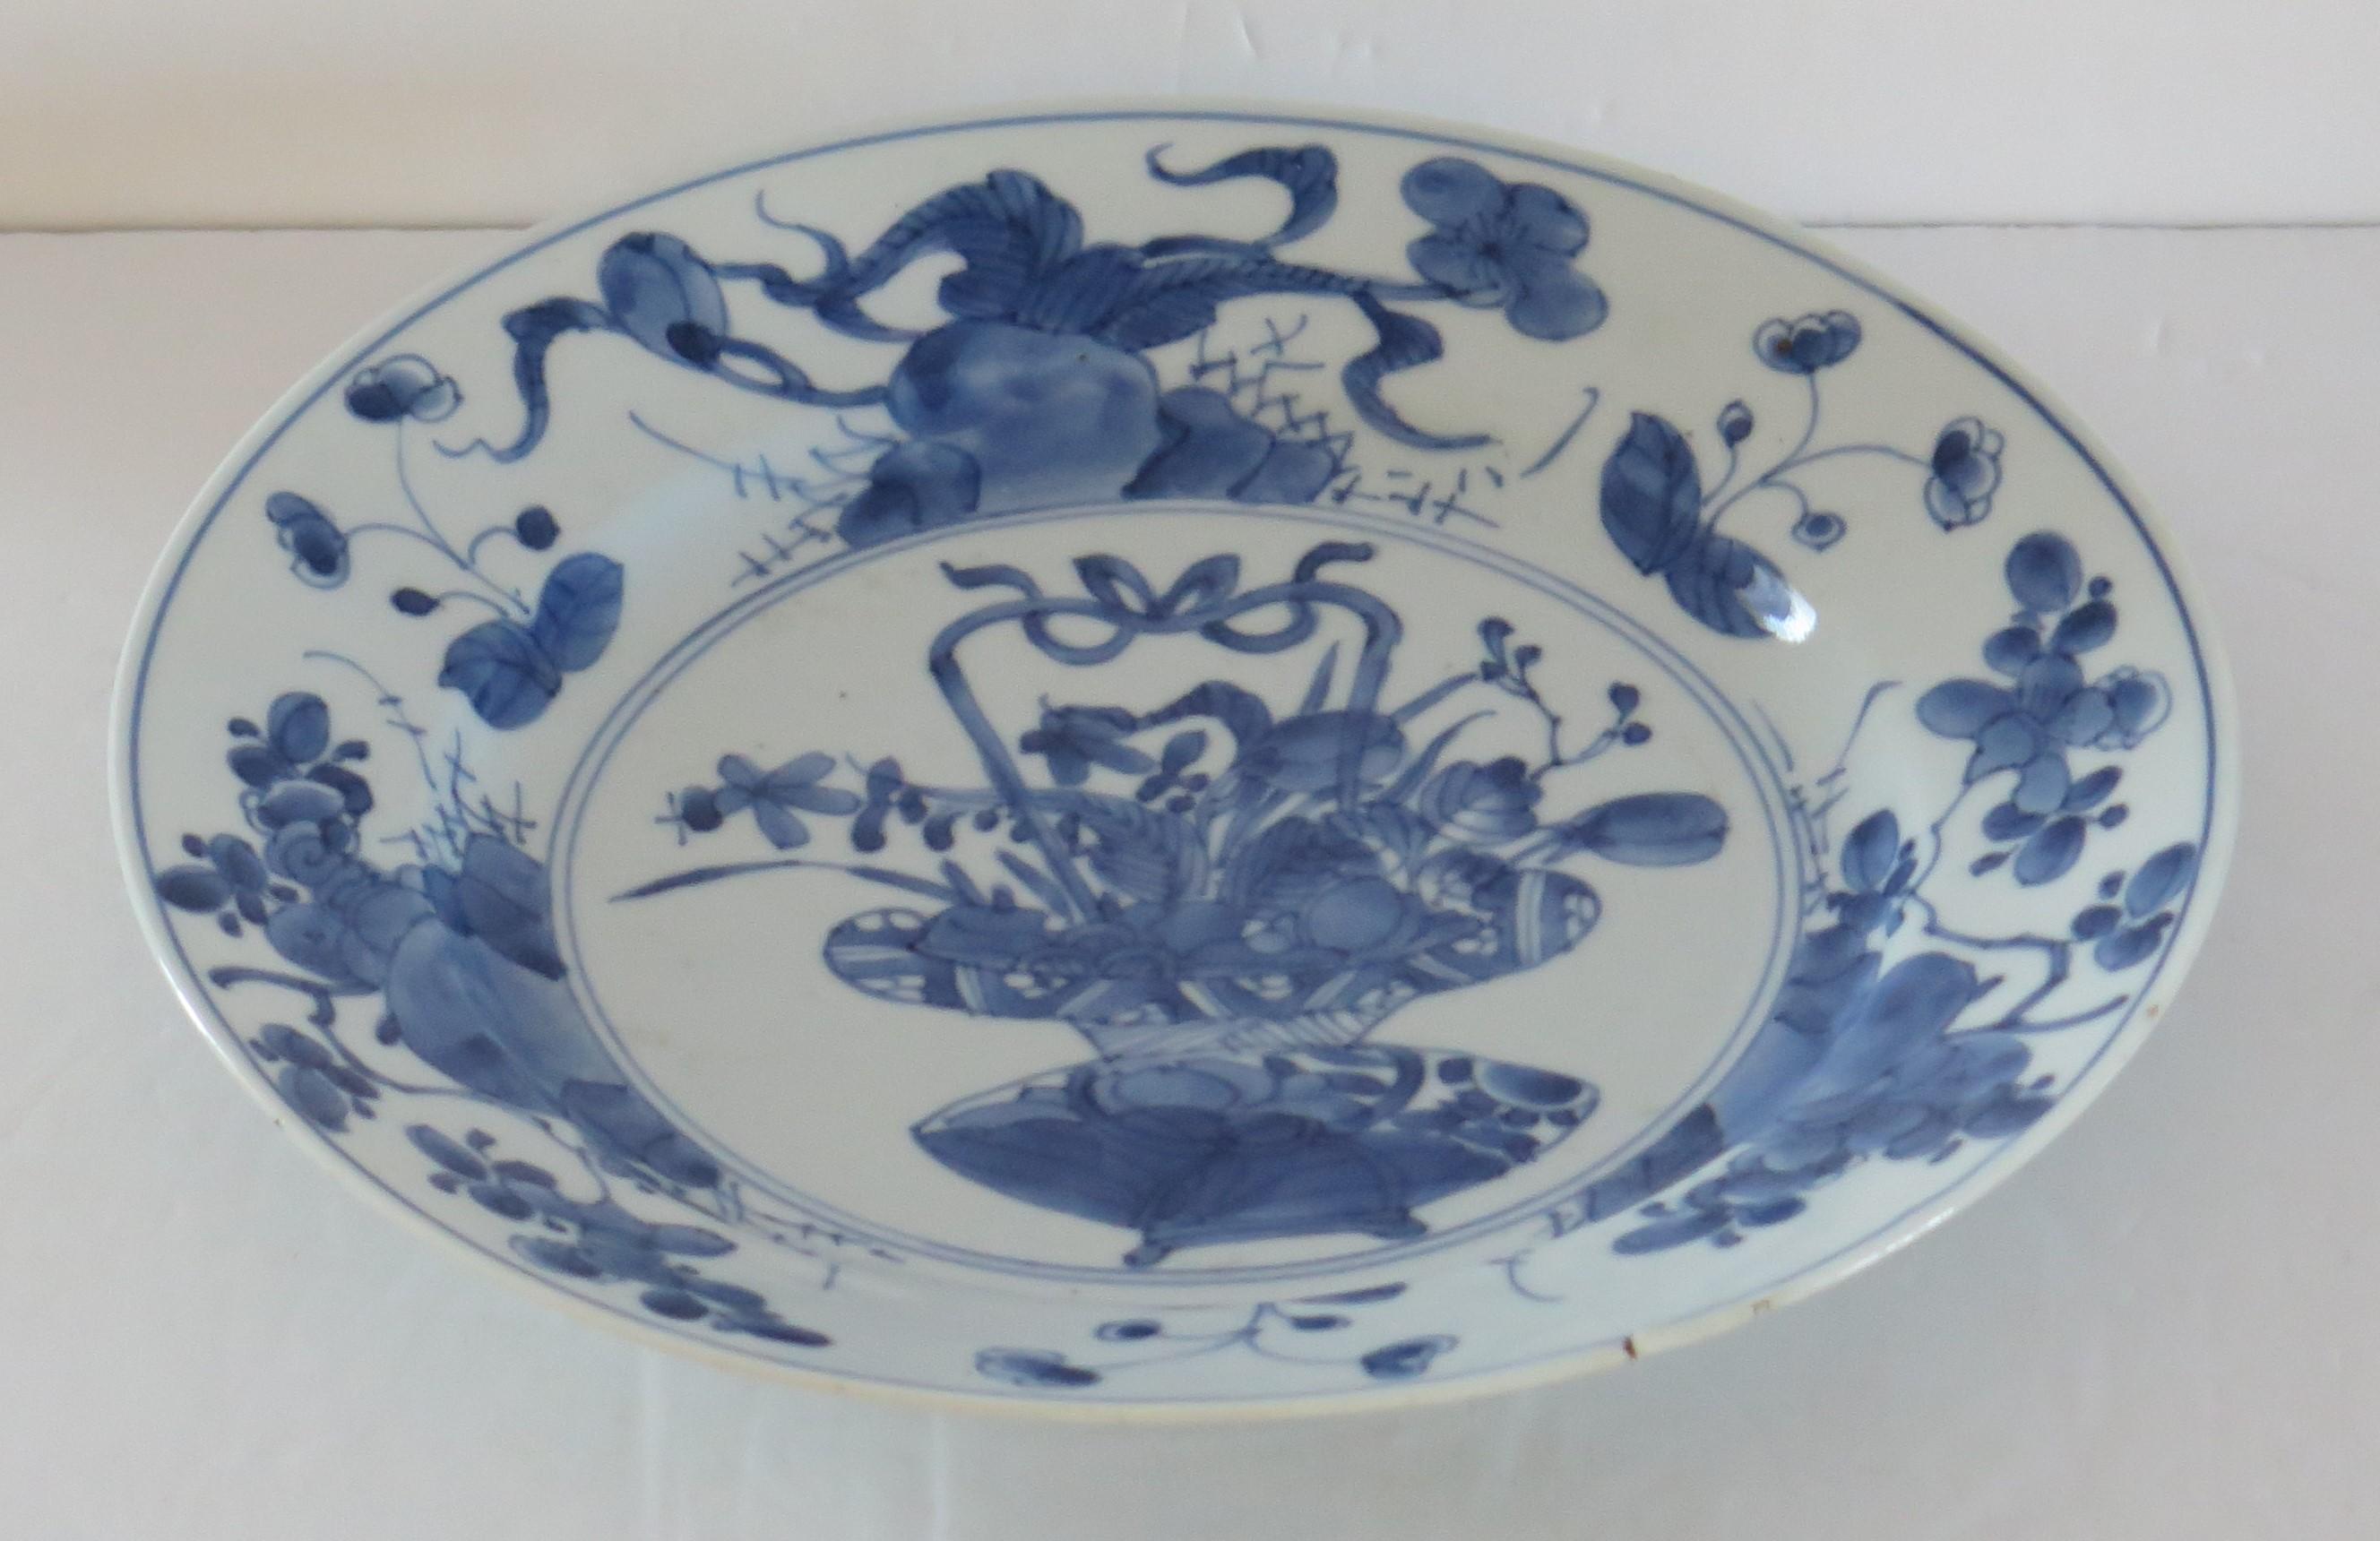 Hand-Painted Kangxi marked Chinese Plate Porcelain Blue & White, Circa 1700